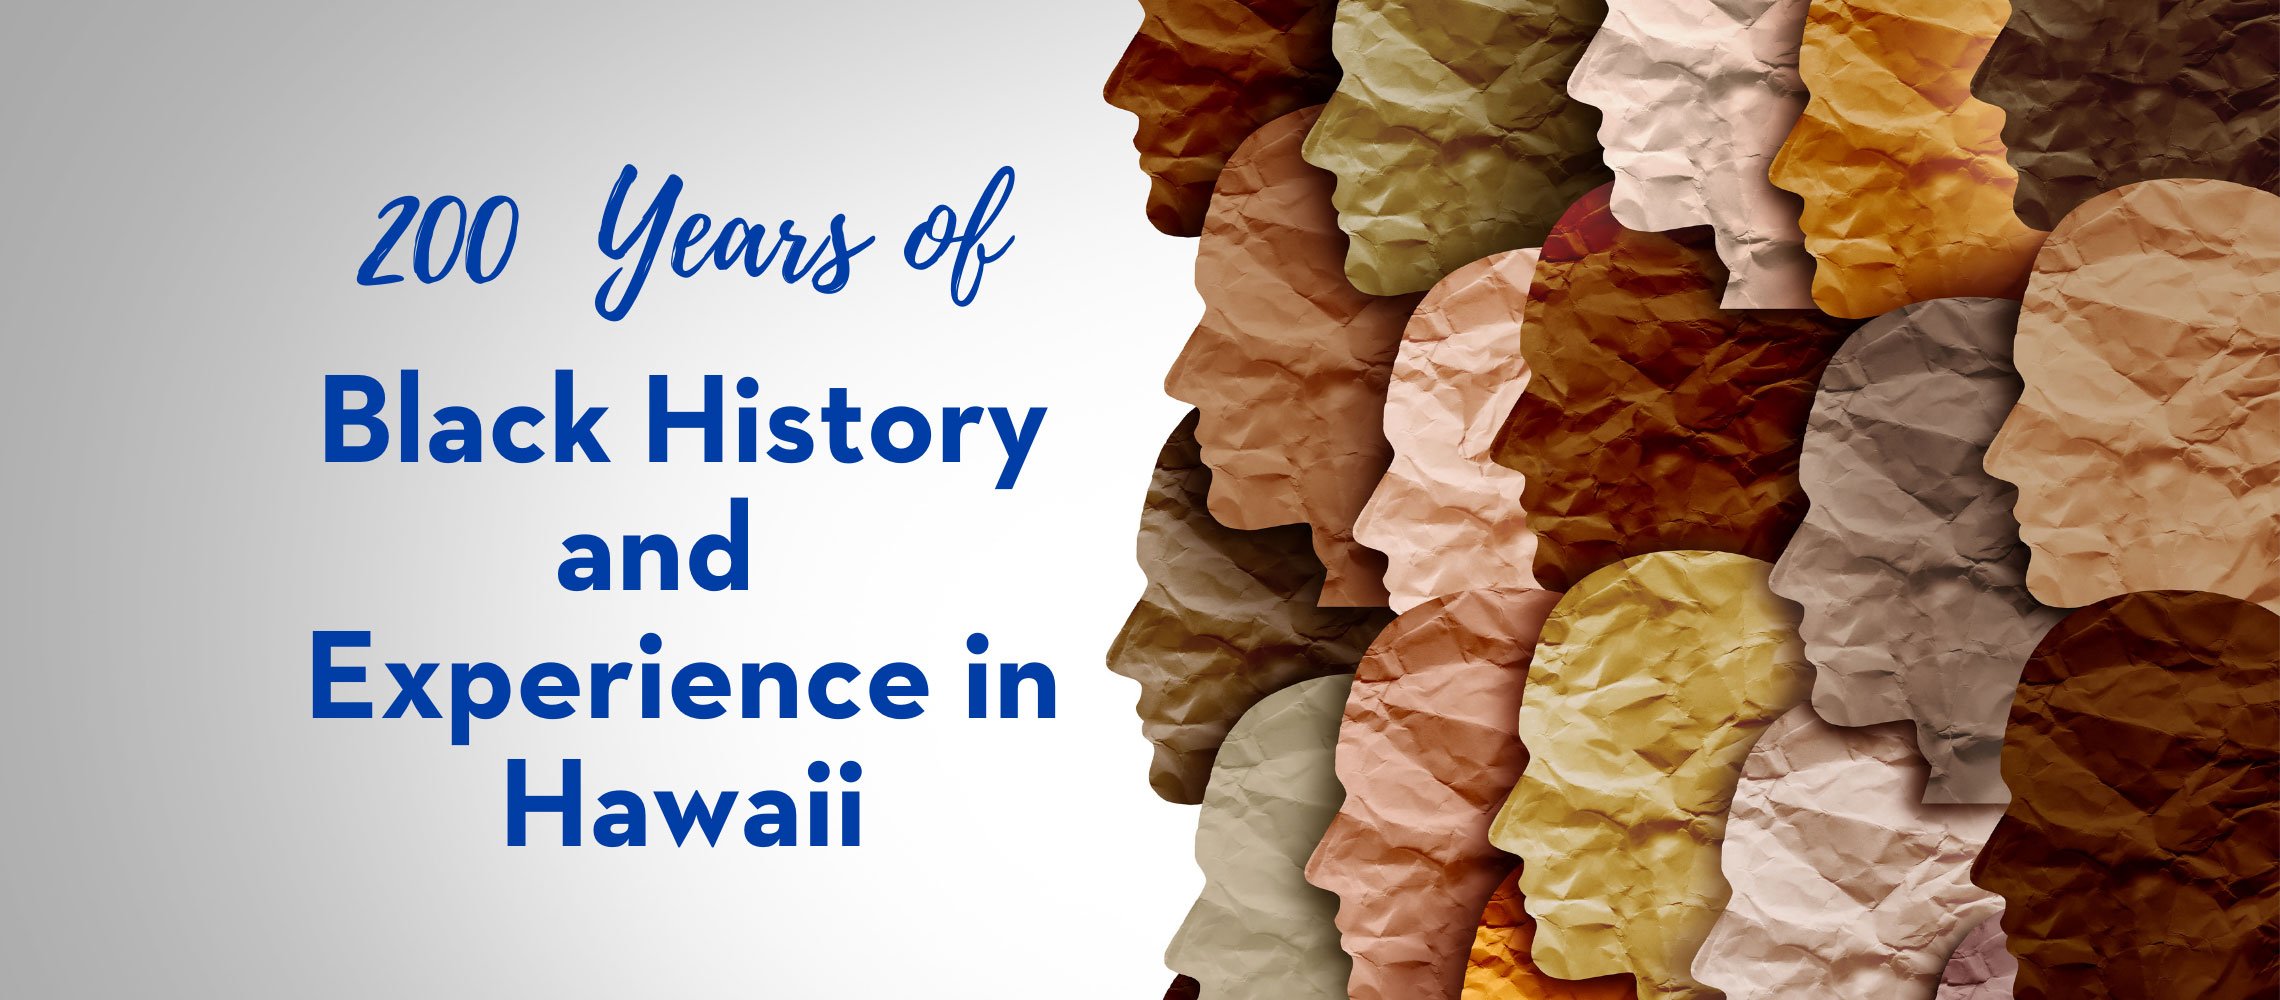 Text: 200 Years of Black History and Experience in Hawaii